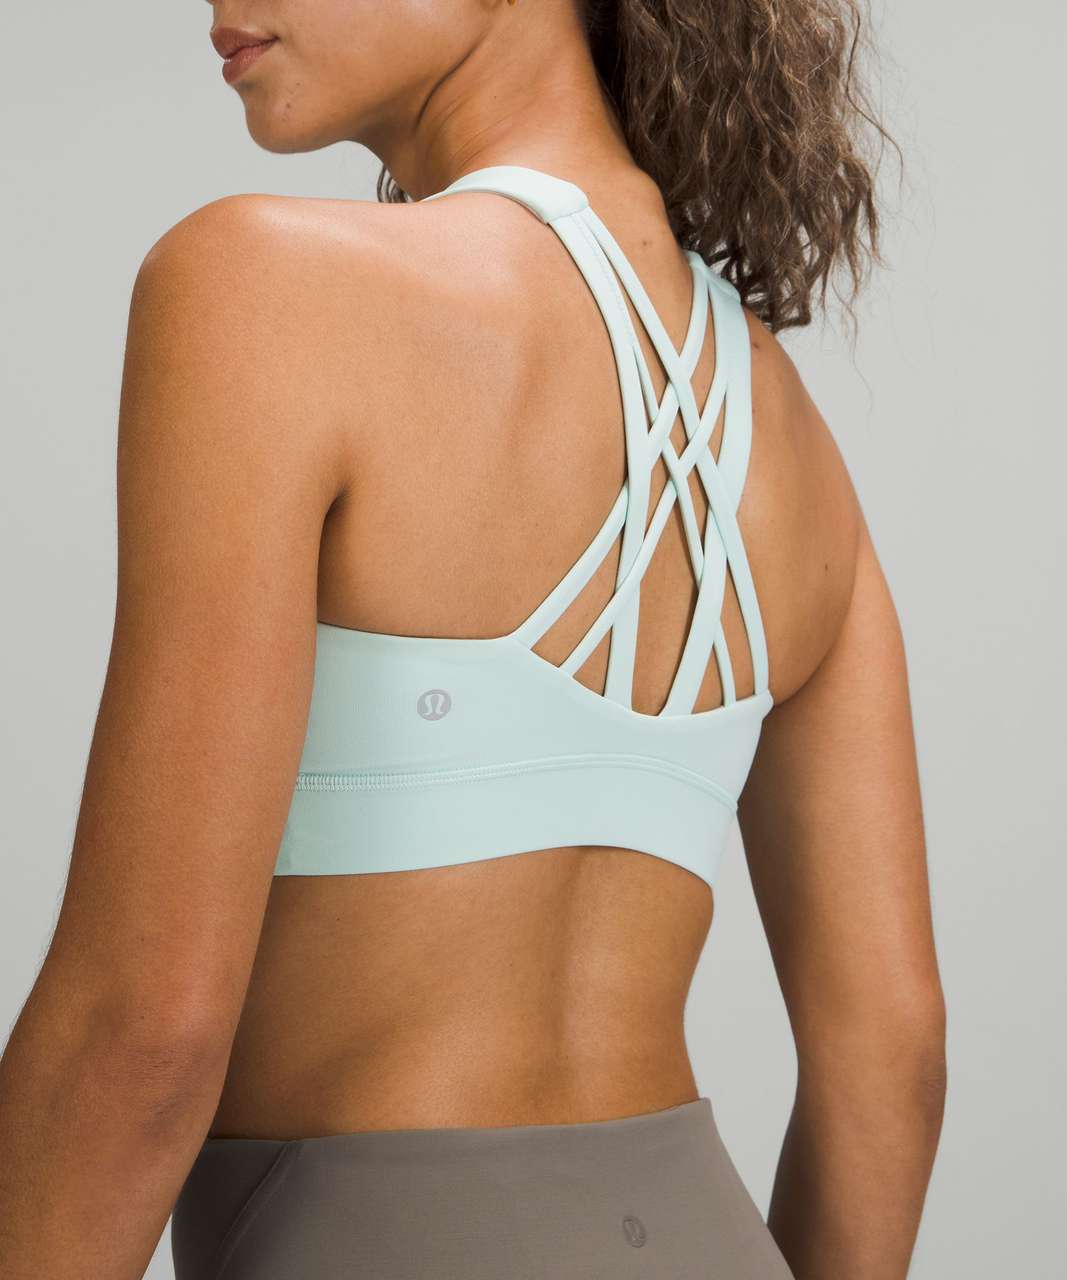 Lululemon Free to Be Elevated Bra *Light Support, DD/DDD(E) Cup - Delicate Mint